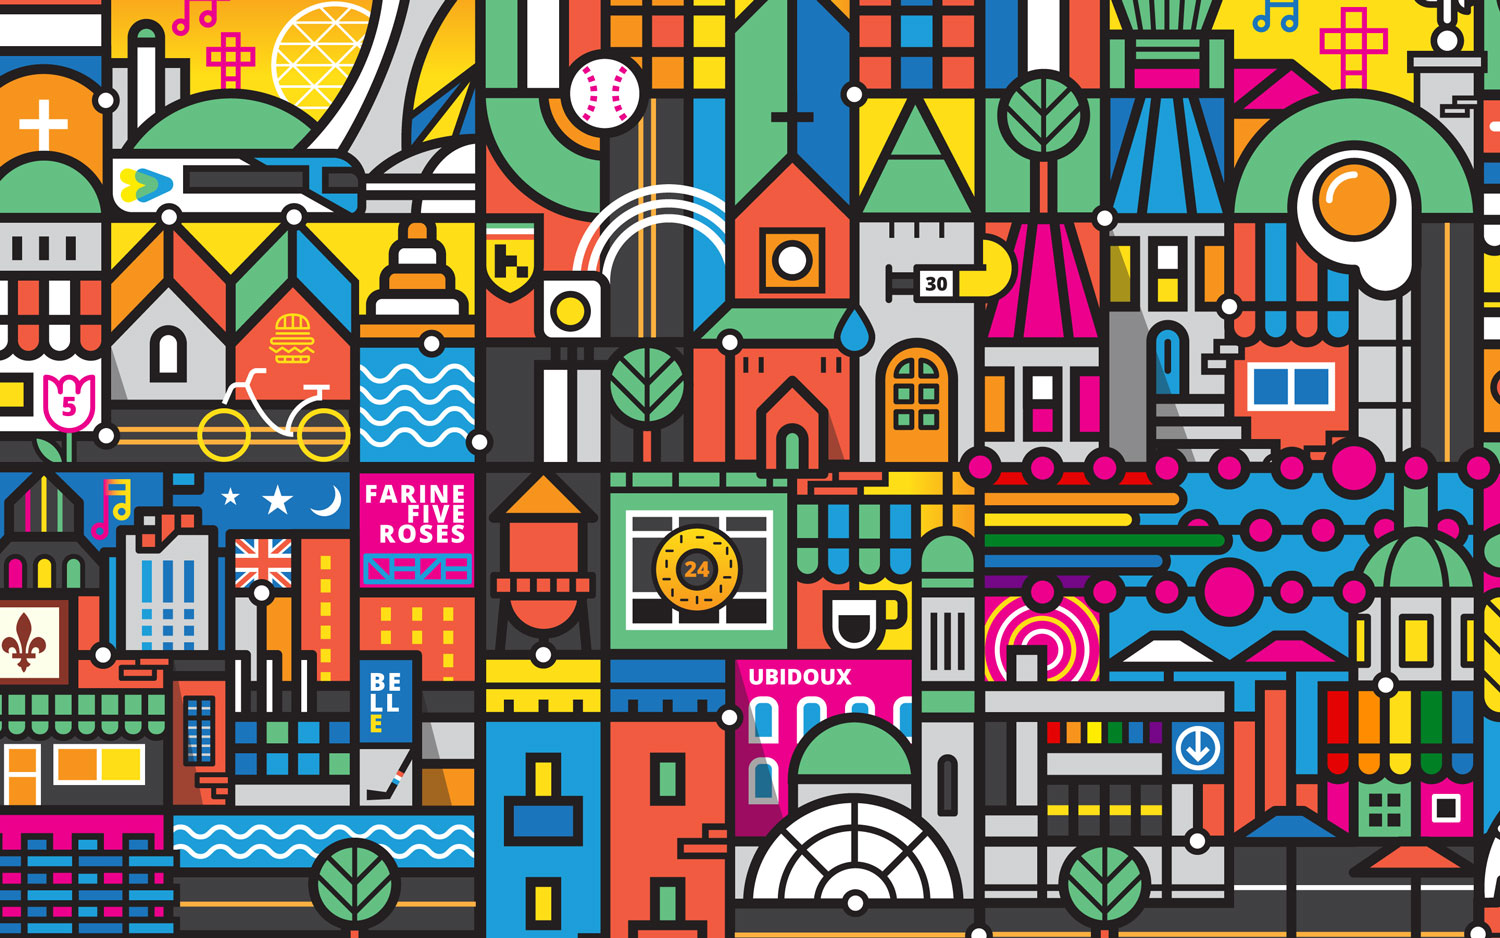 Geometrical, colourful and bold illustration of Montreal City areas by Loogart